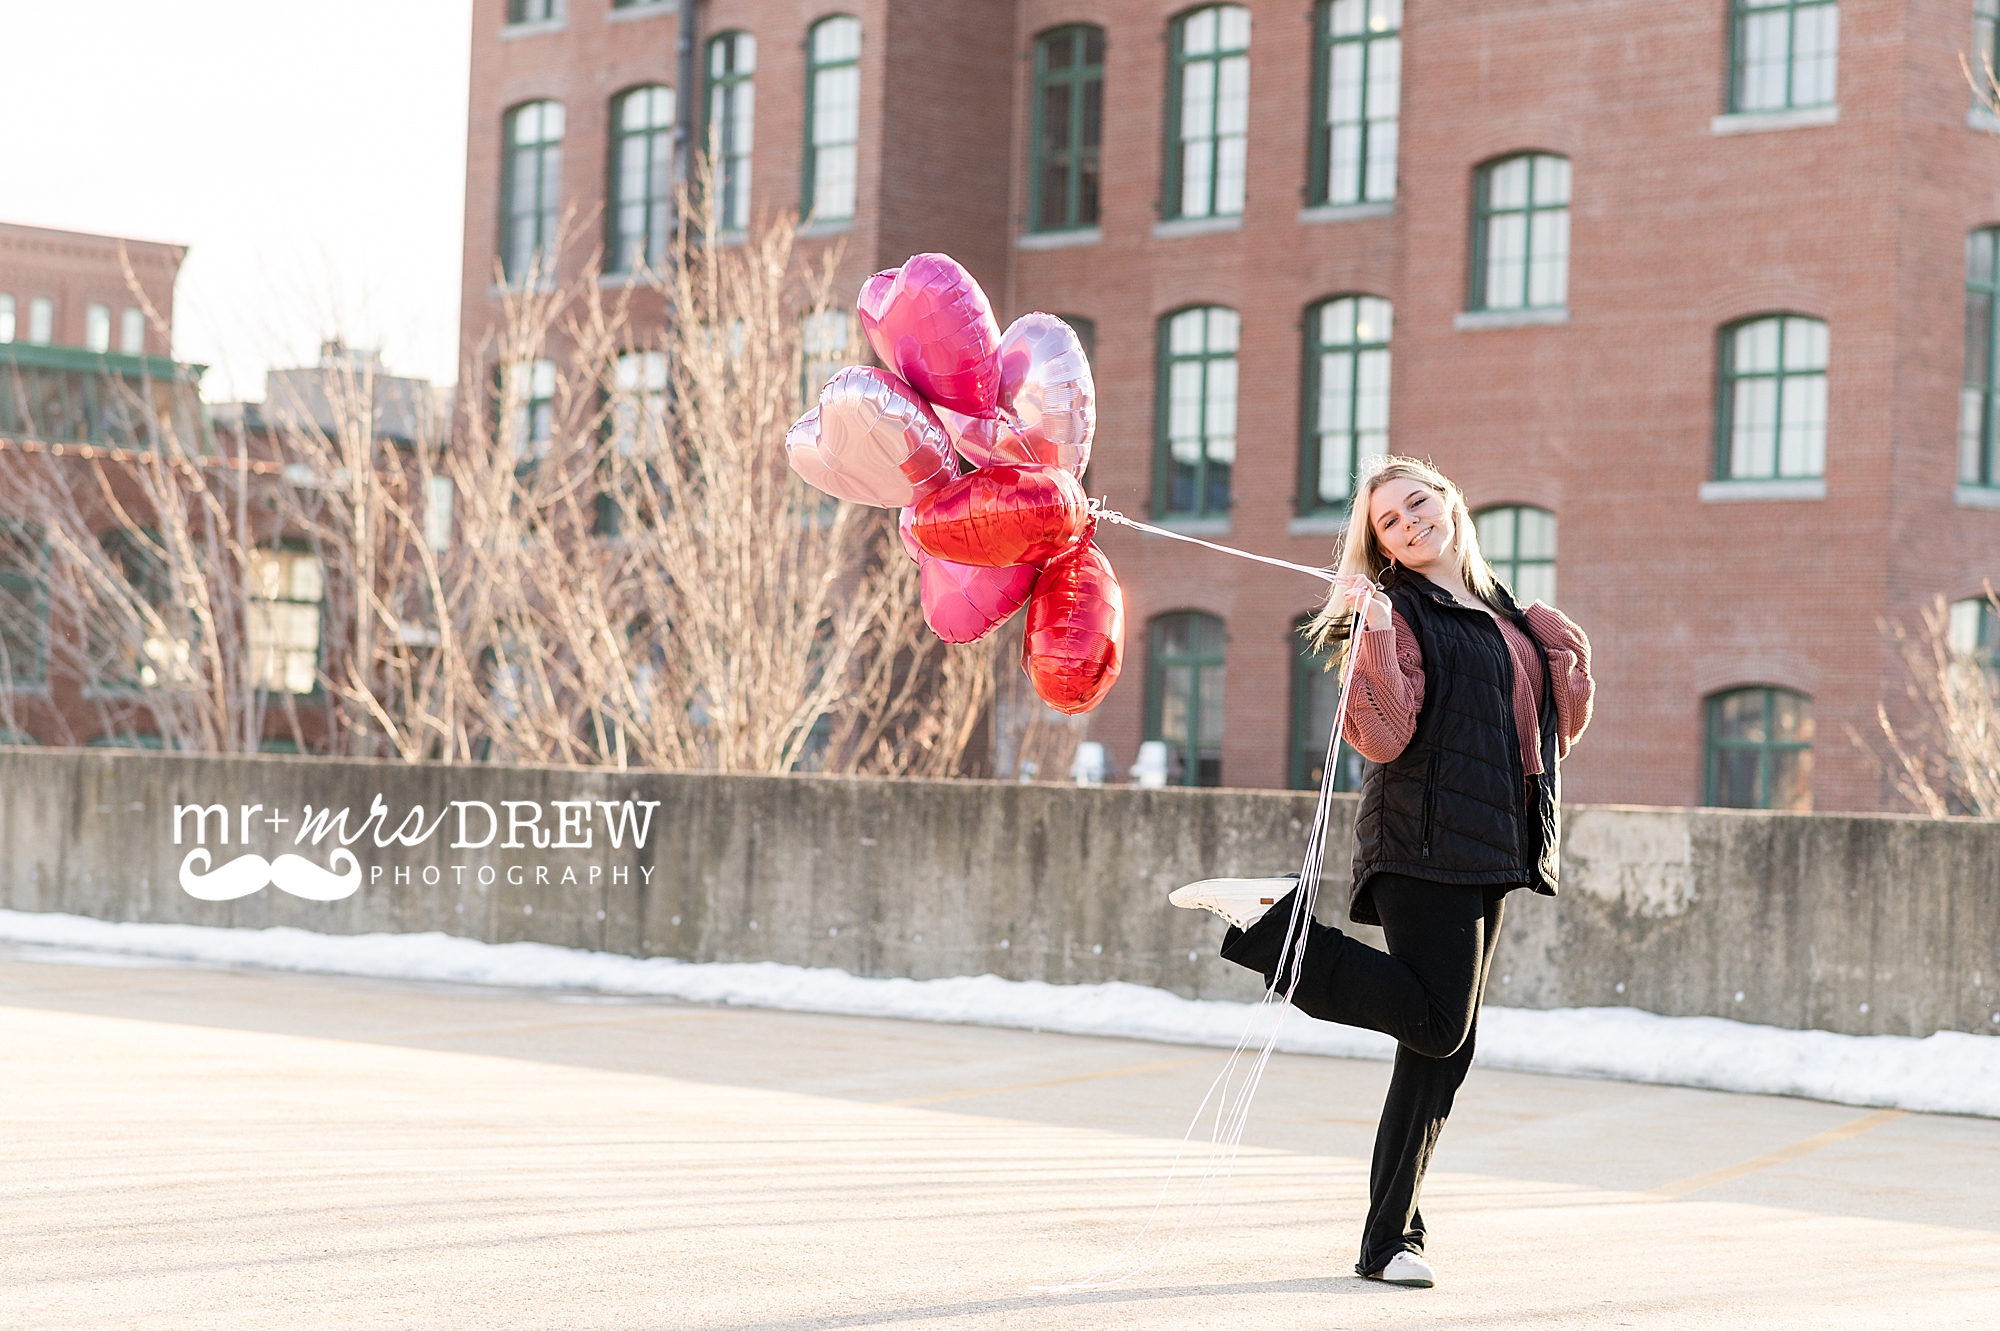 Balloons as an accessory for senior photos in Lowell MA